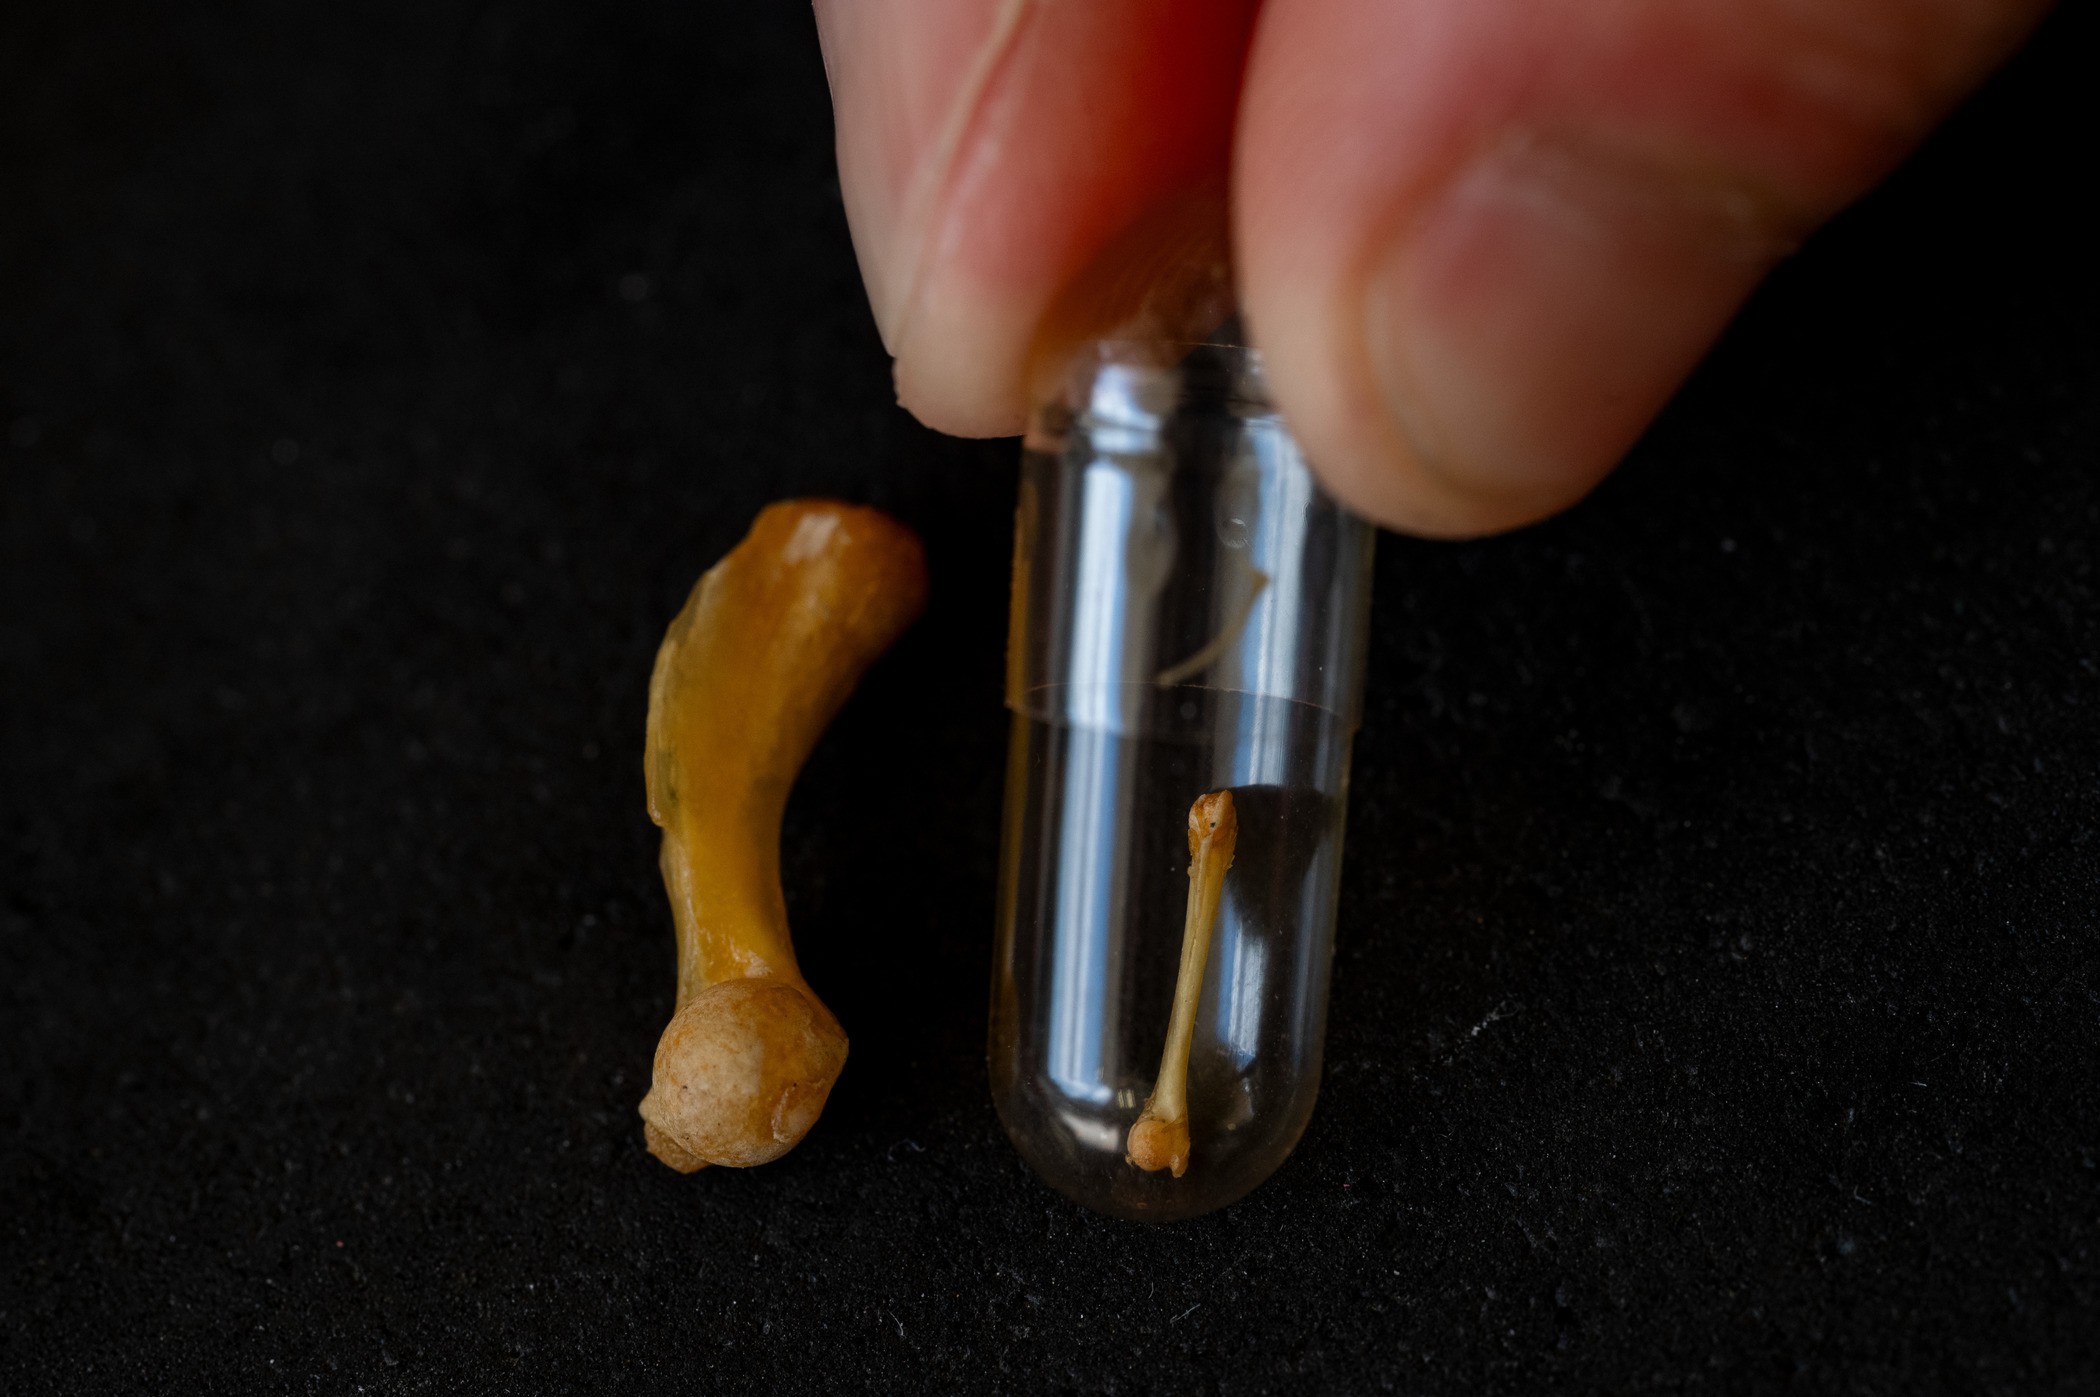 A close up of two frog bones against a black background. The smaller one is inside a test tube, and the larger one is out on the table.